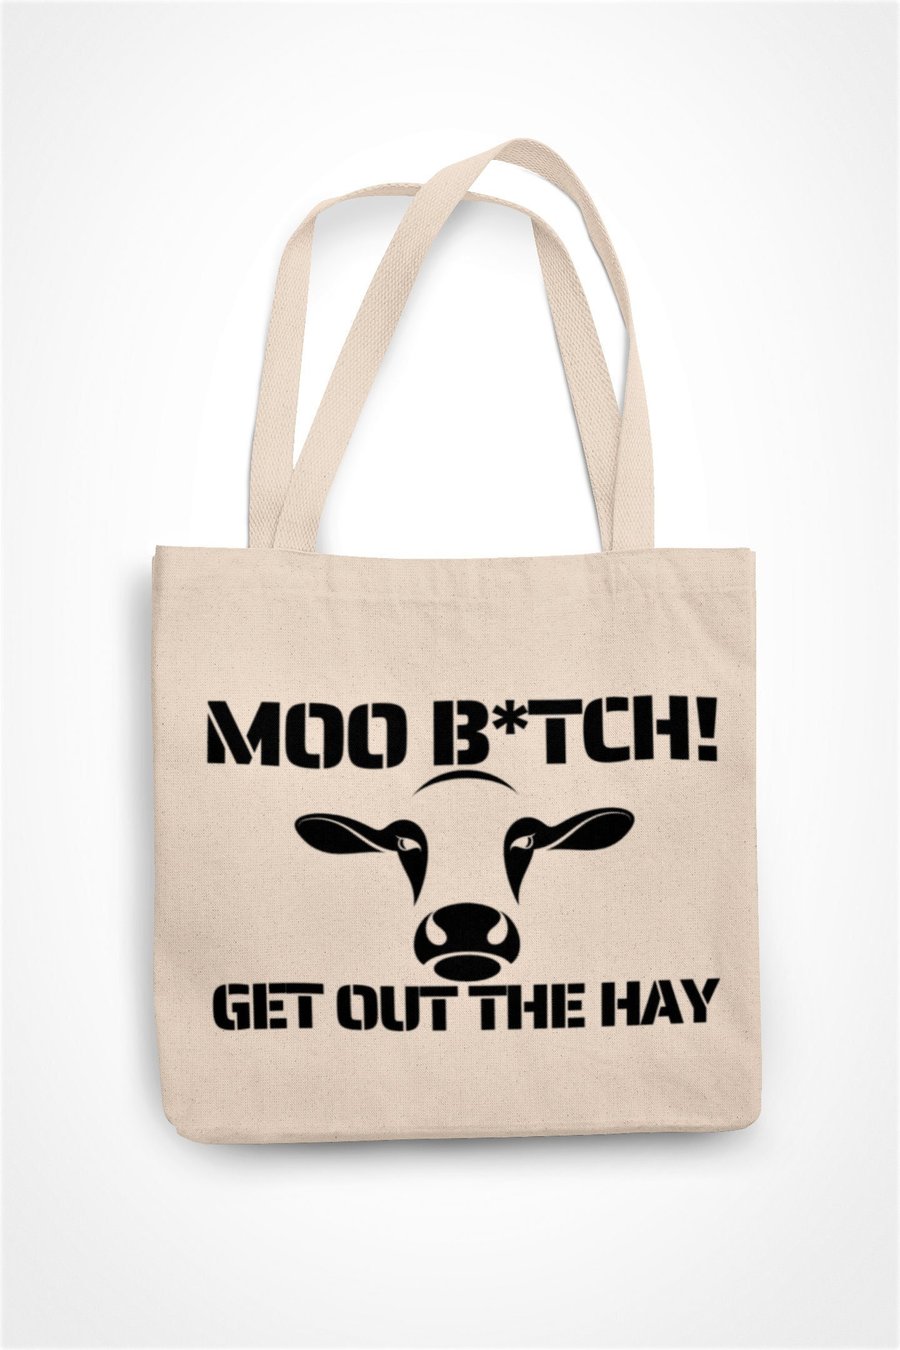 Moo Btch Get Out The Hay Tote Bag Novelty Animal Cow Farmer Joke Eco Friendly 